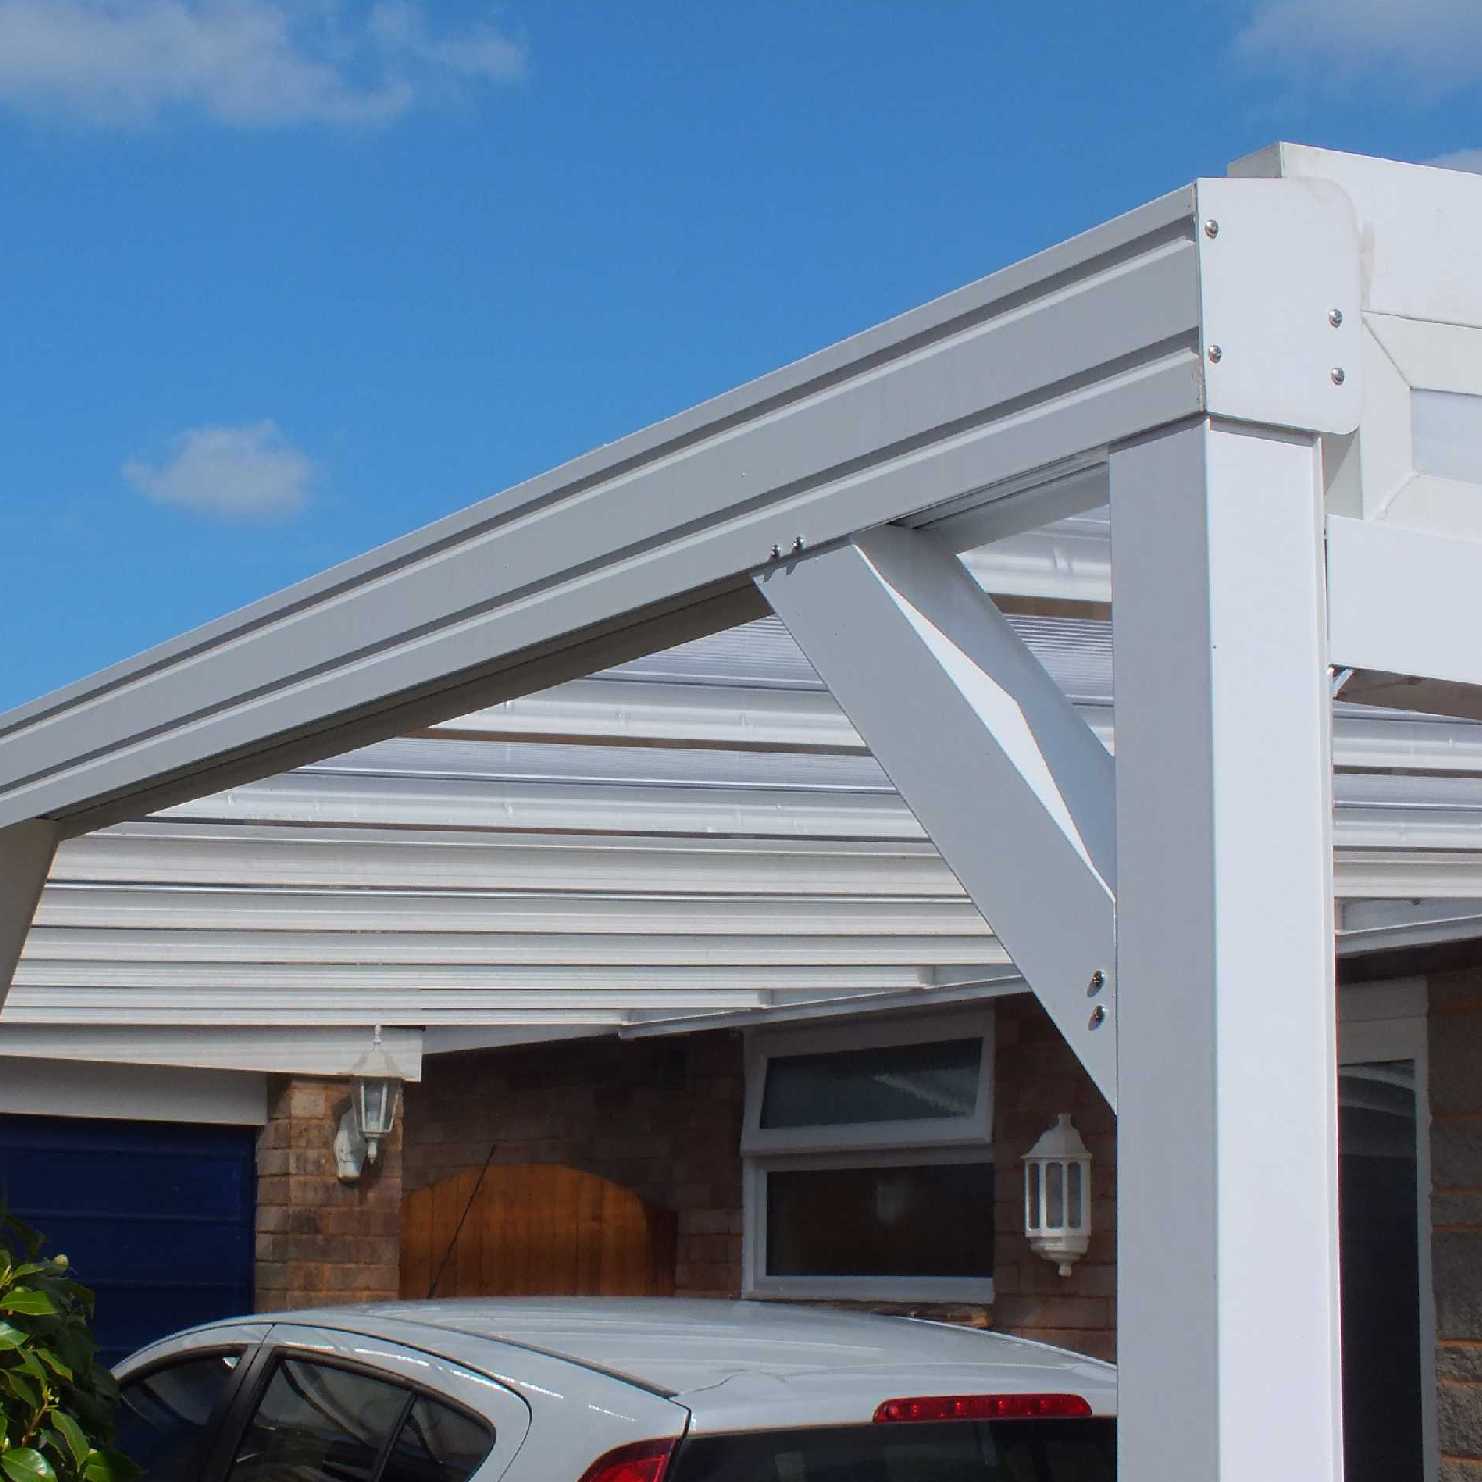 Great deals on Omega Smart Lean-To Canopy, White with 16mm Polycarbonate Glazing - 12.0m (W) x 1.5m (P), (5) Supporting Posts